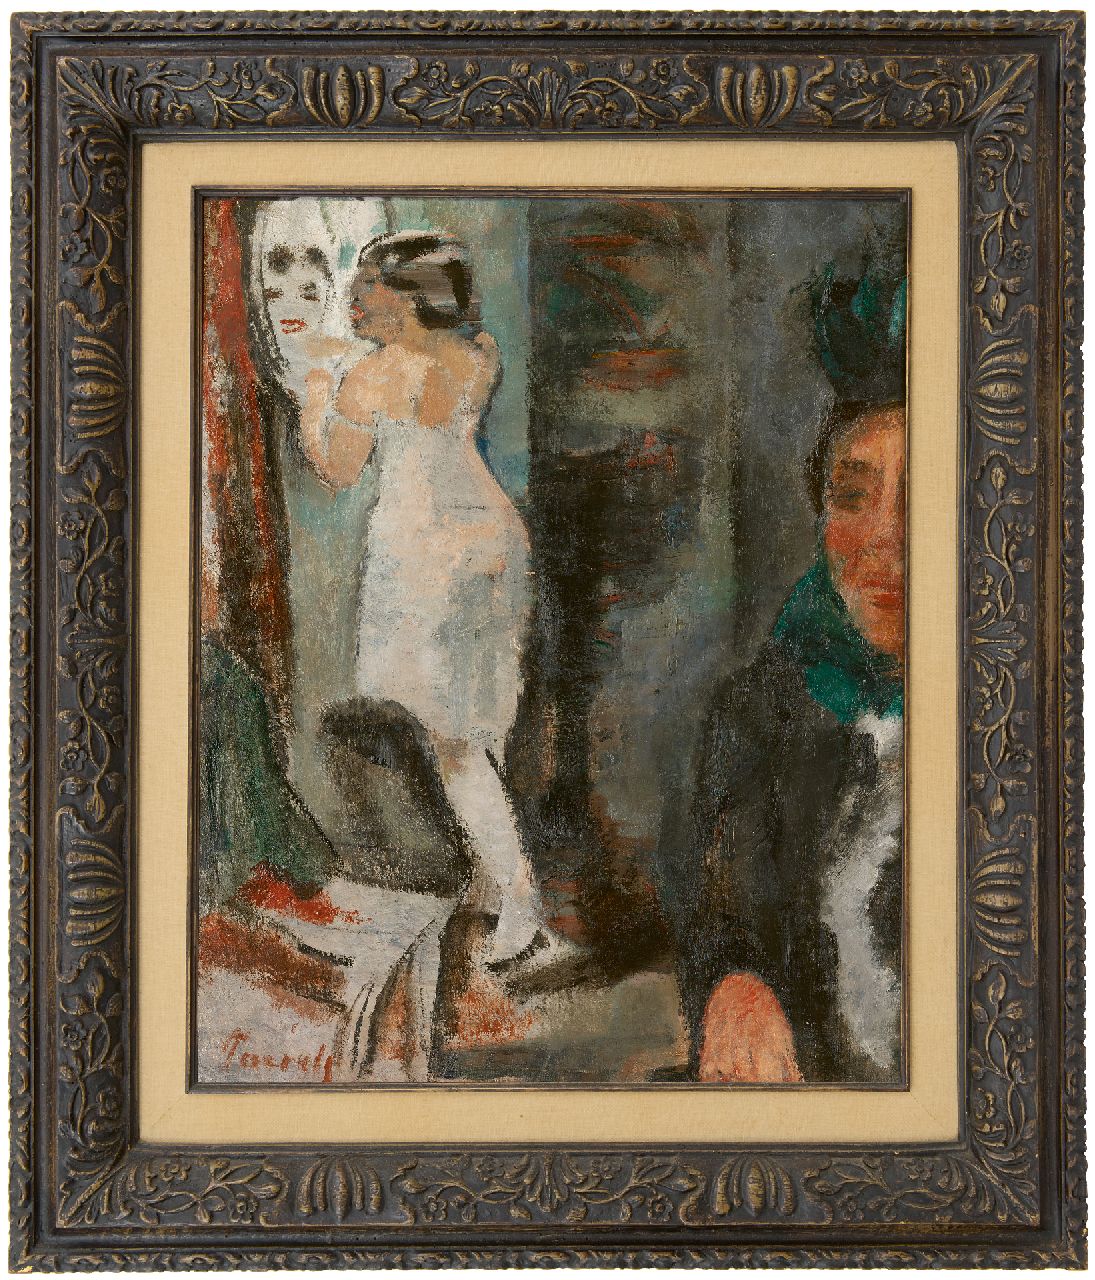 Paerels W.A.  | 'Willem' Adriaan Paerels | Paintings offered for sale | Woman at a mirror, oil on canvas 50.0 x 40.0 cm, signed l.l. and painted 1922